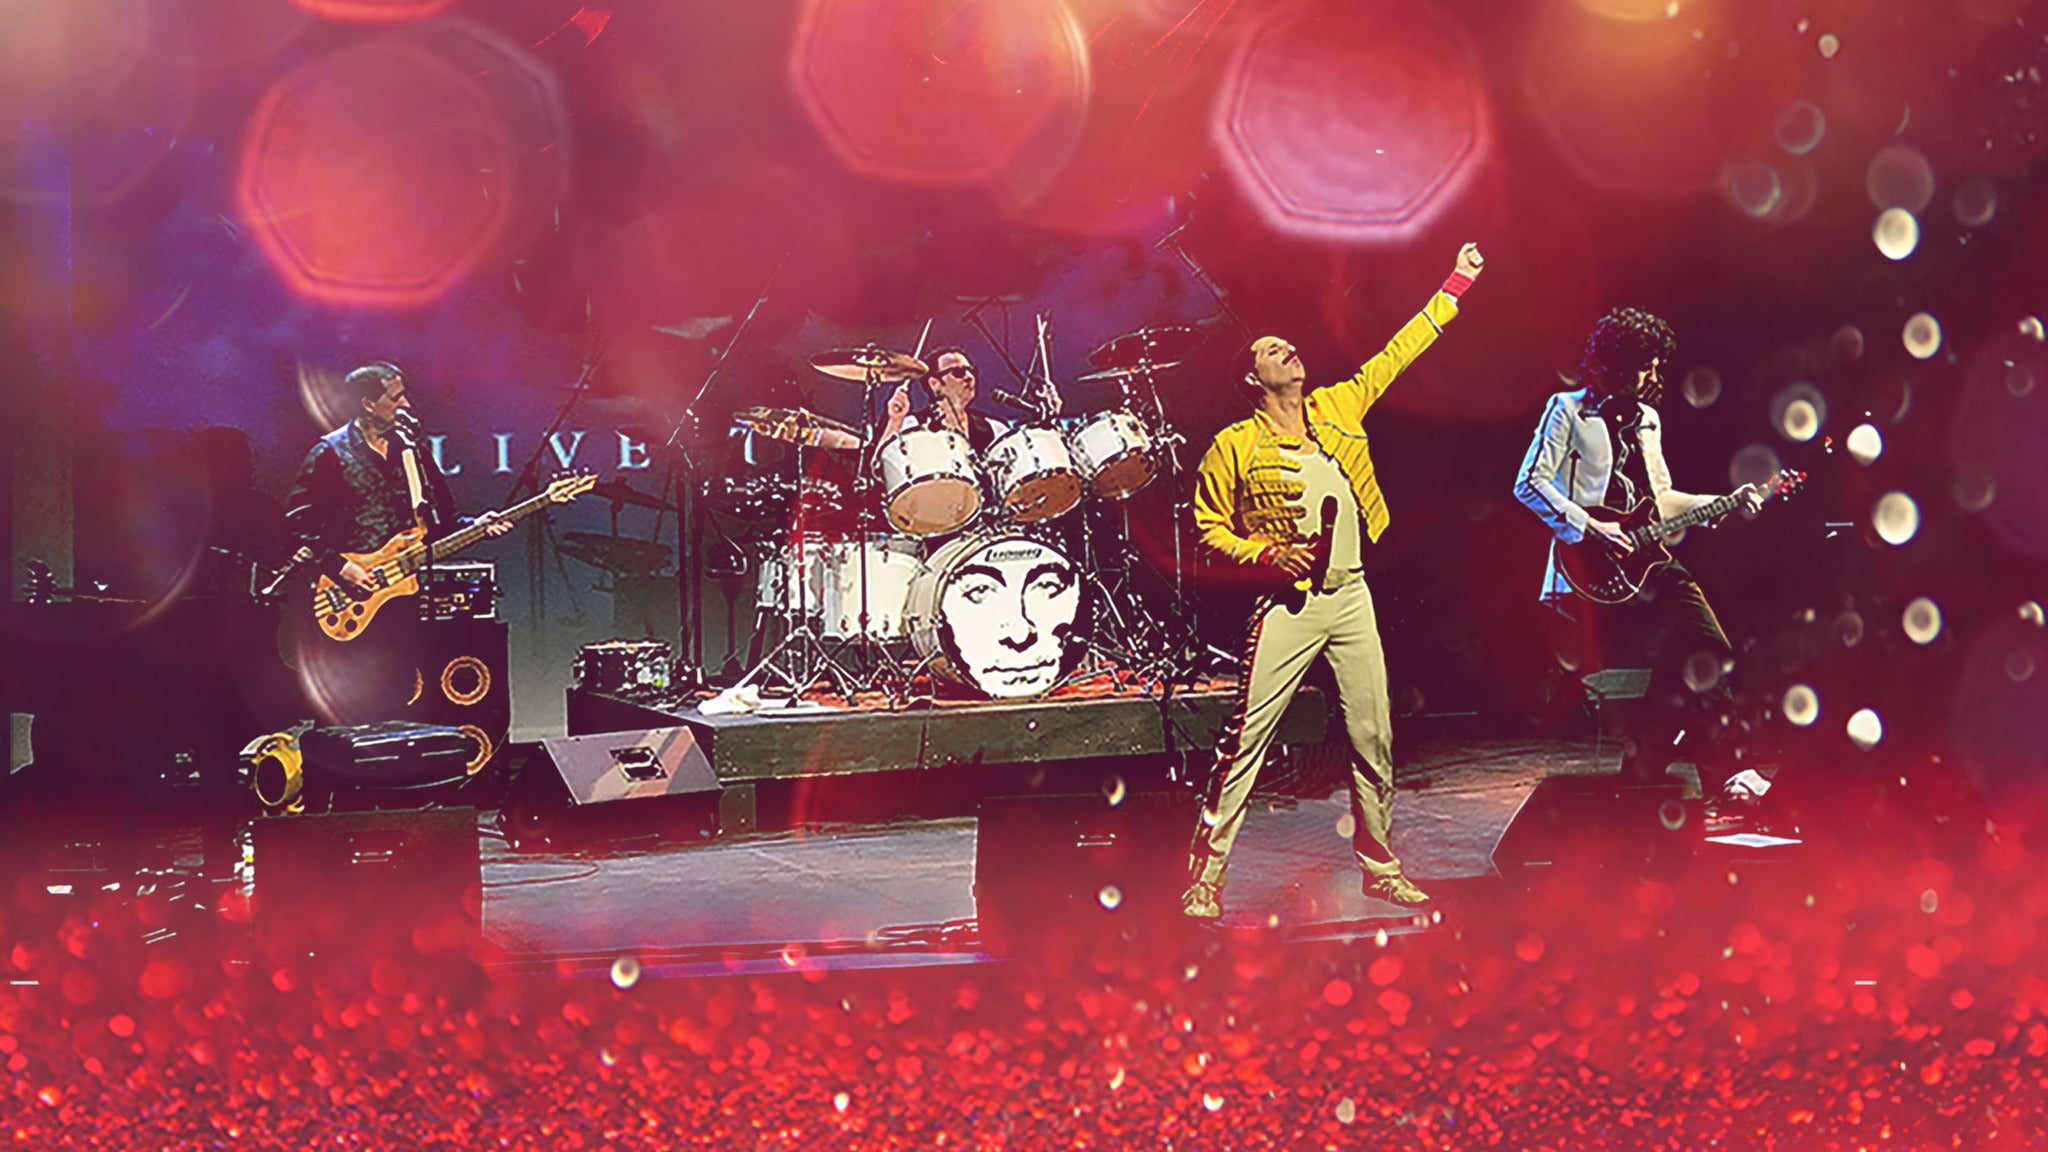 Image used with permission from Ticketmaster | Simply Queen tickets